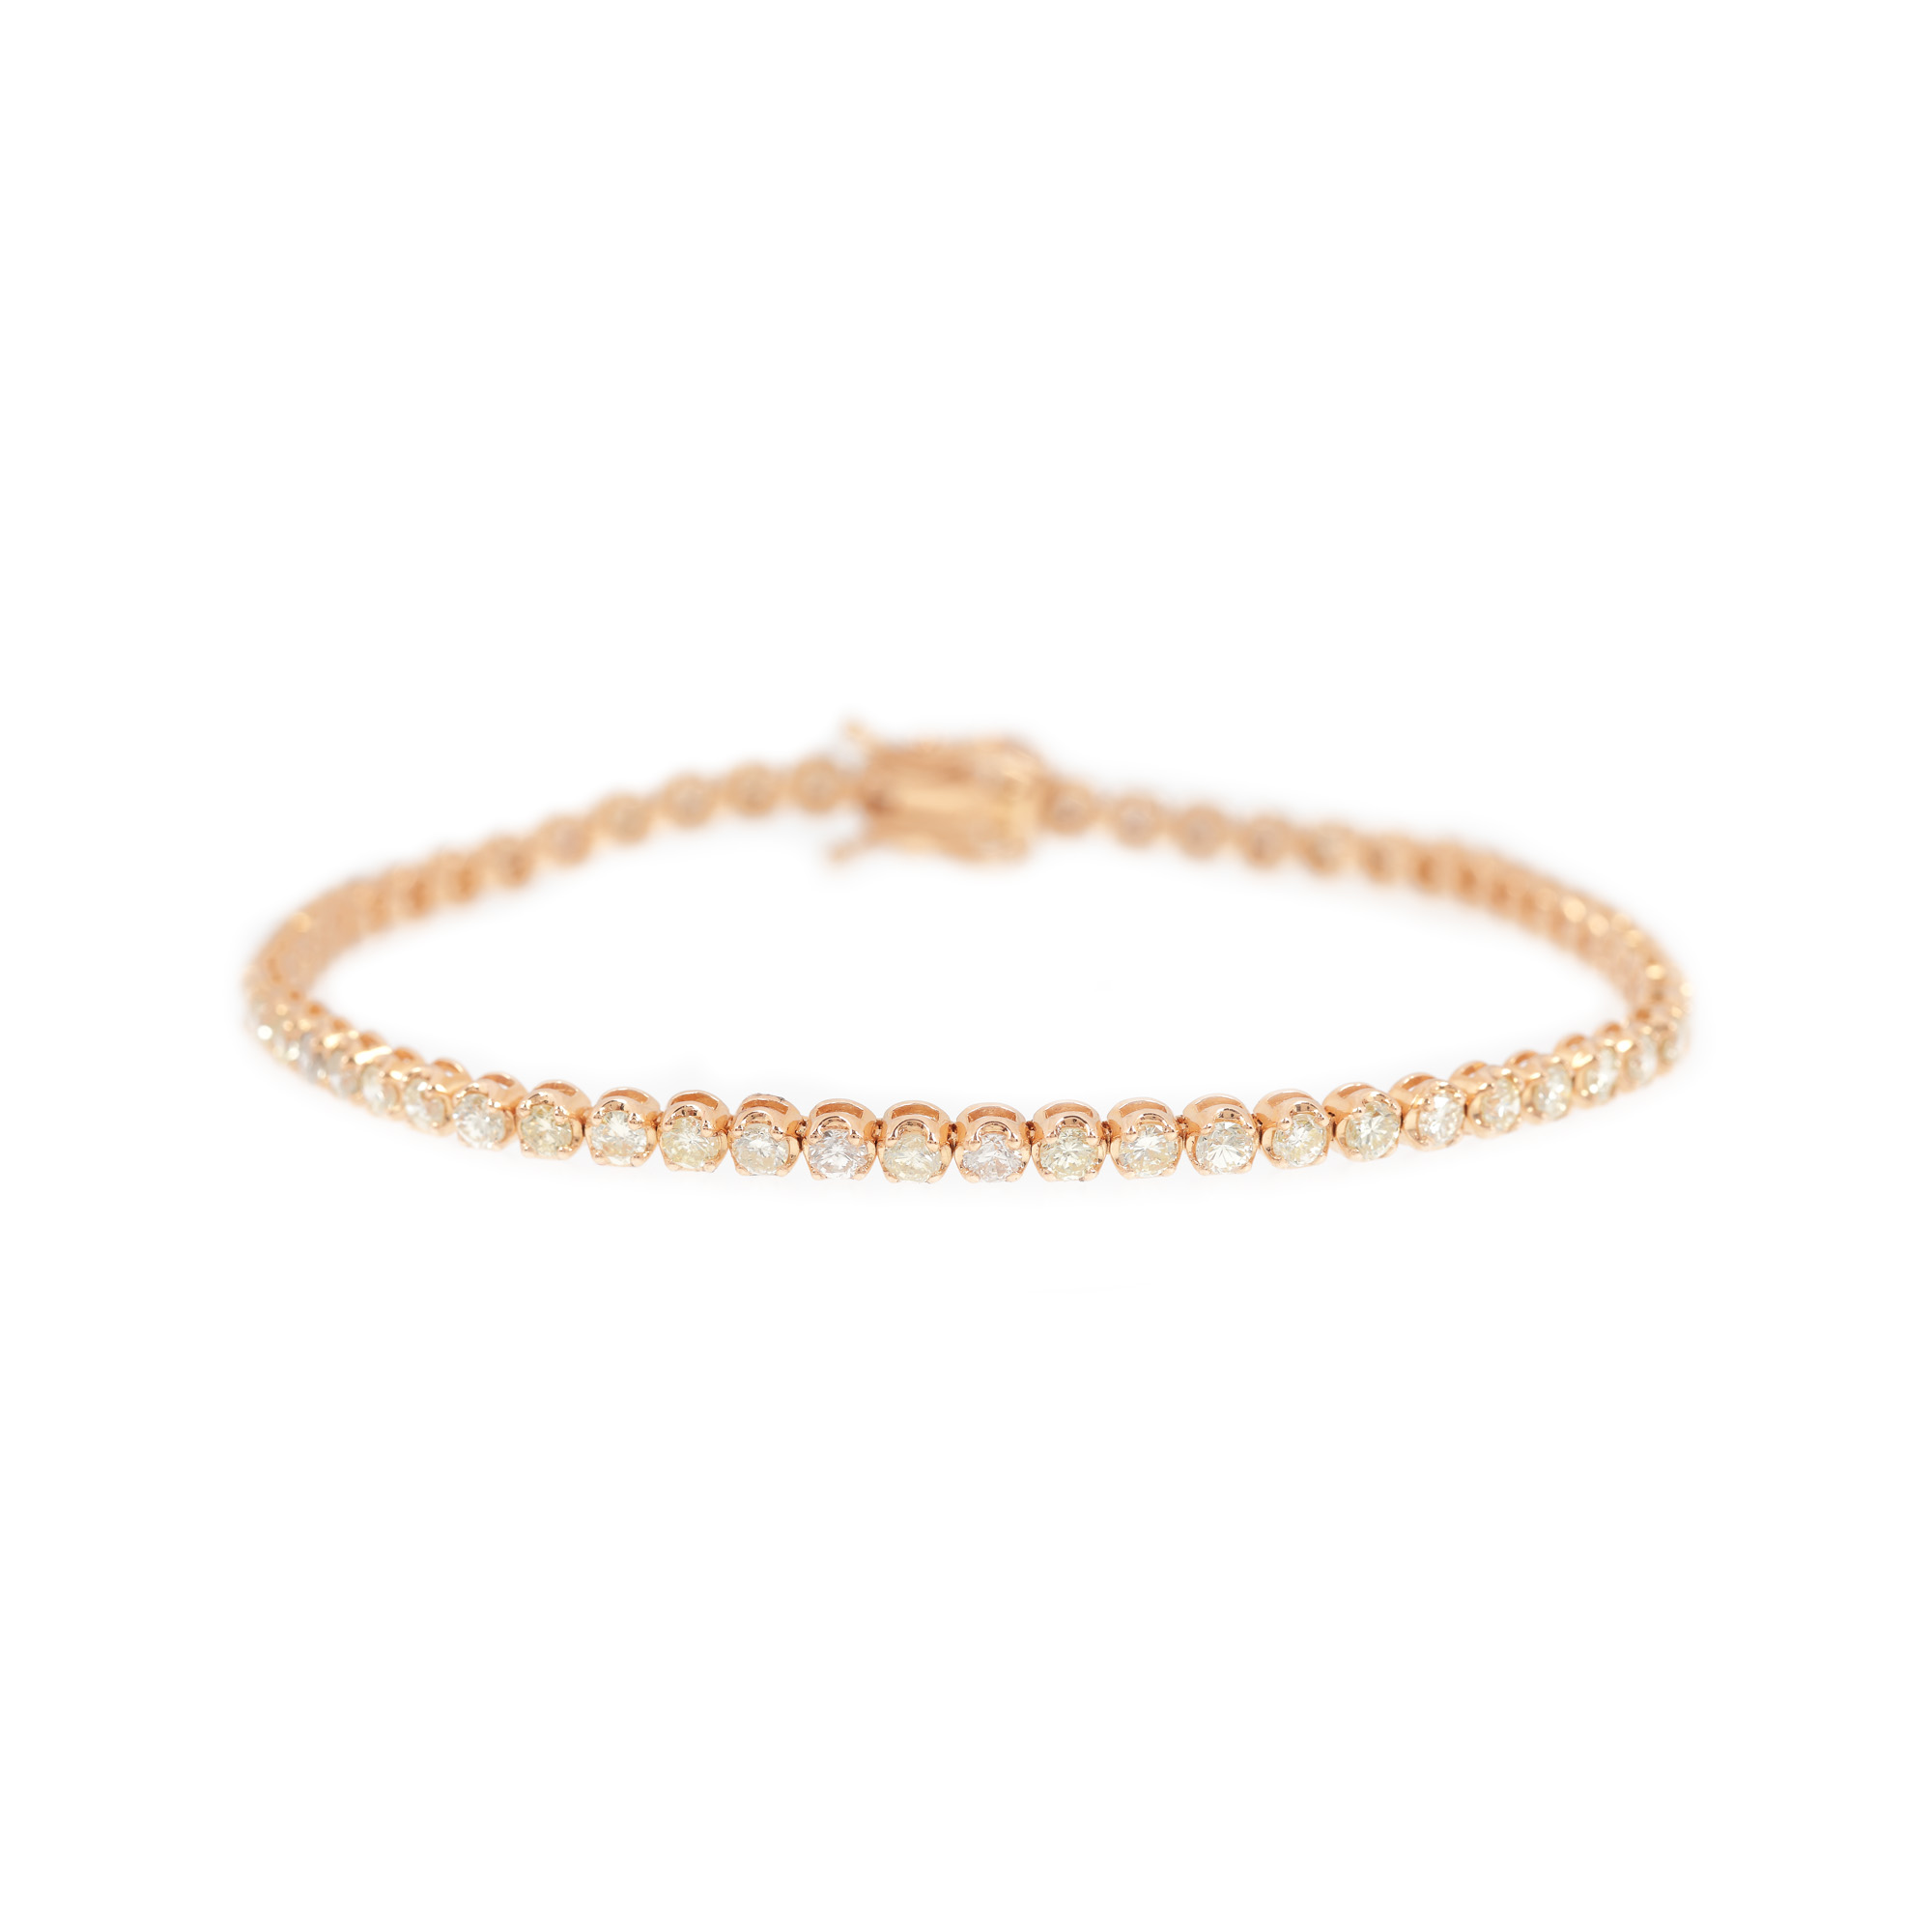 Tennis bracelet, rose gold, decorated with diamonds - Image 2 of 2